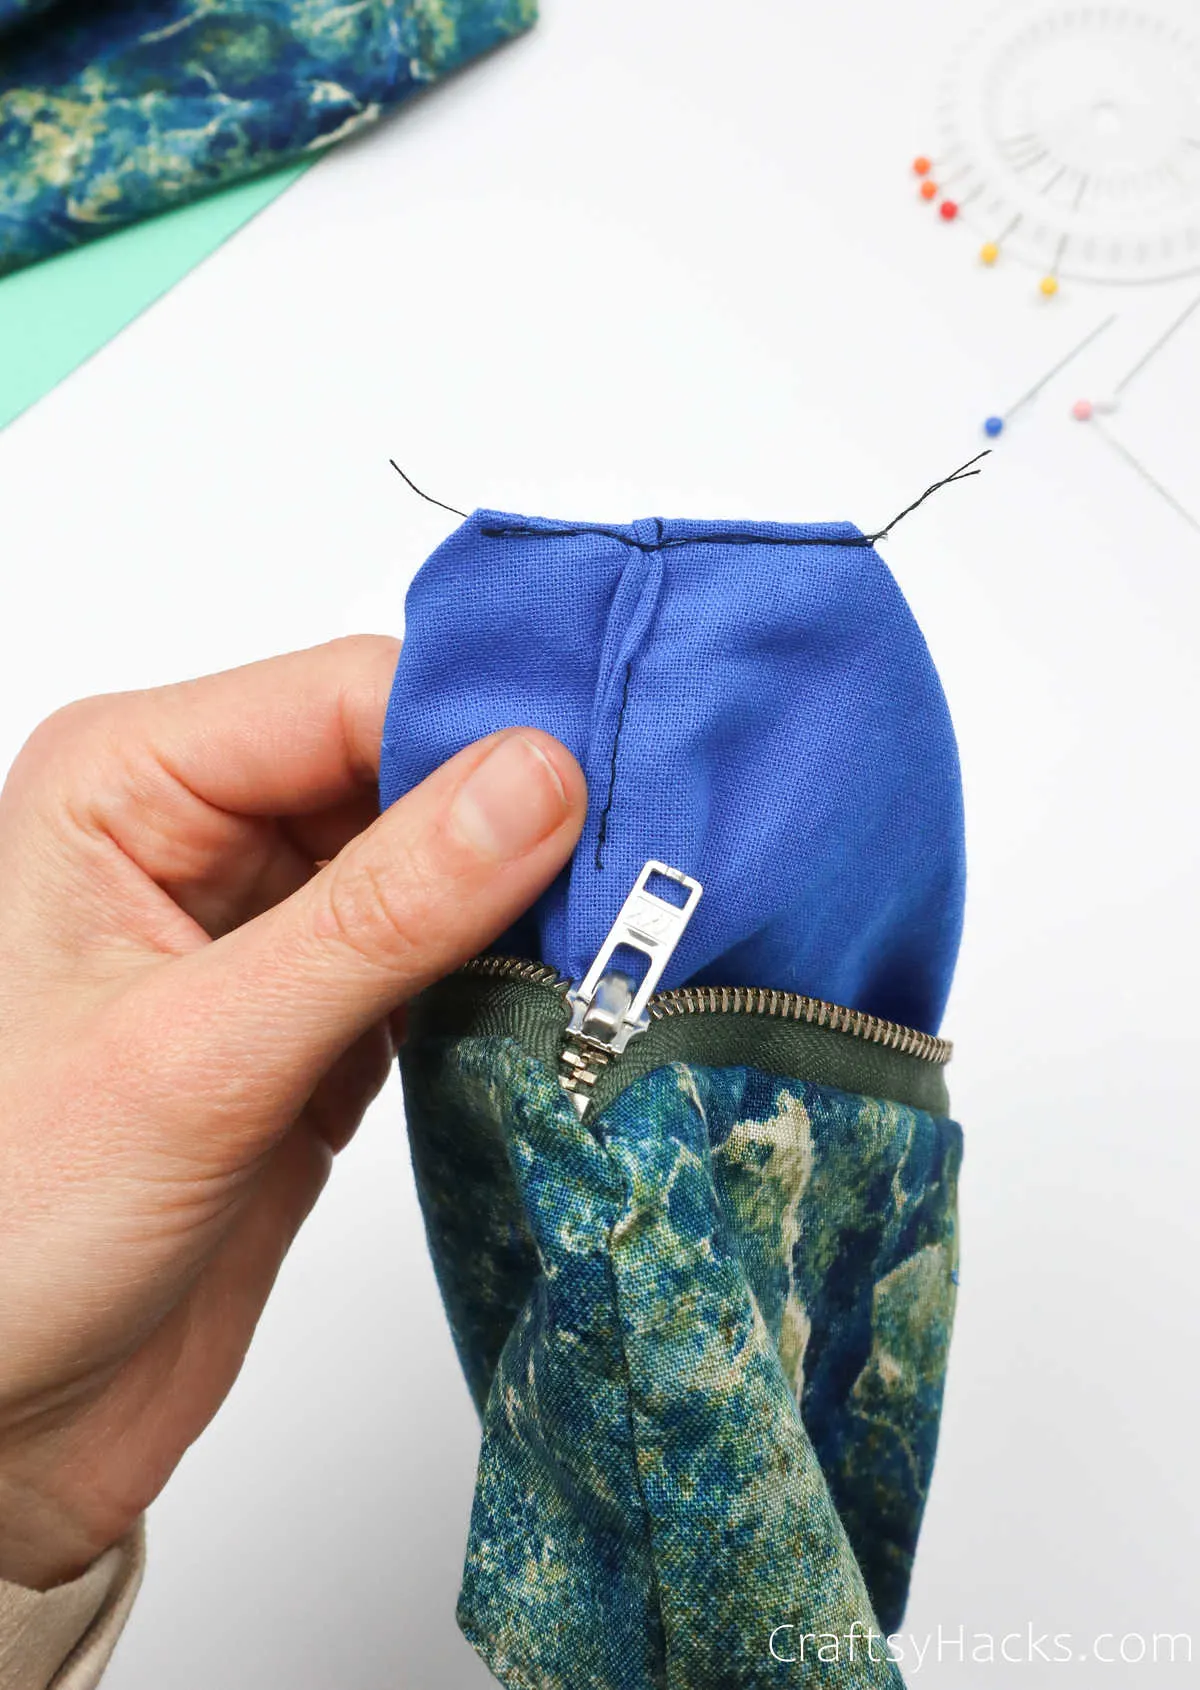 sewn inside of pouch